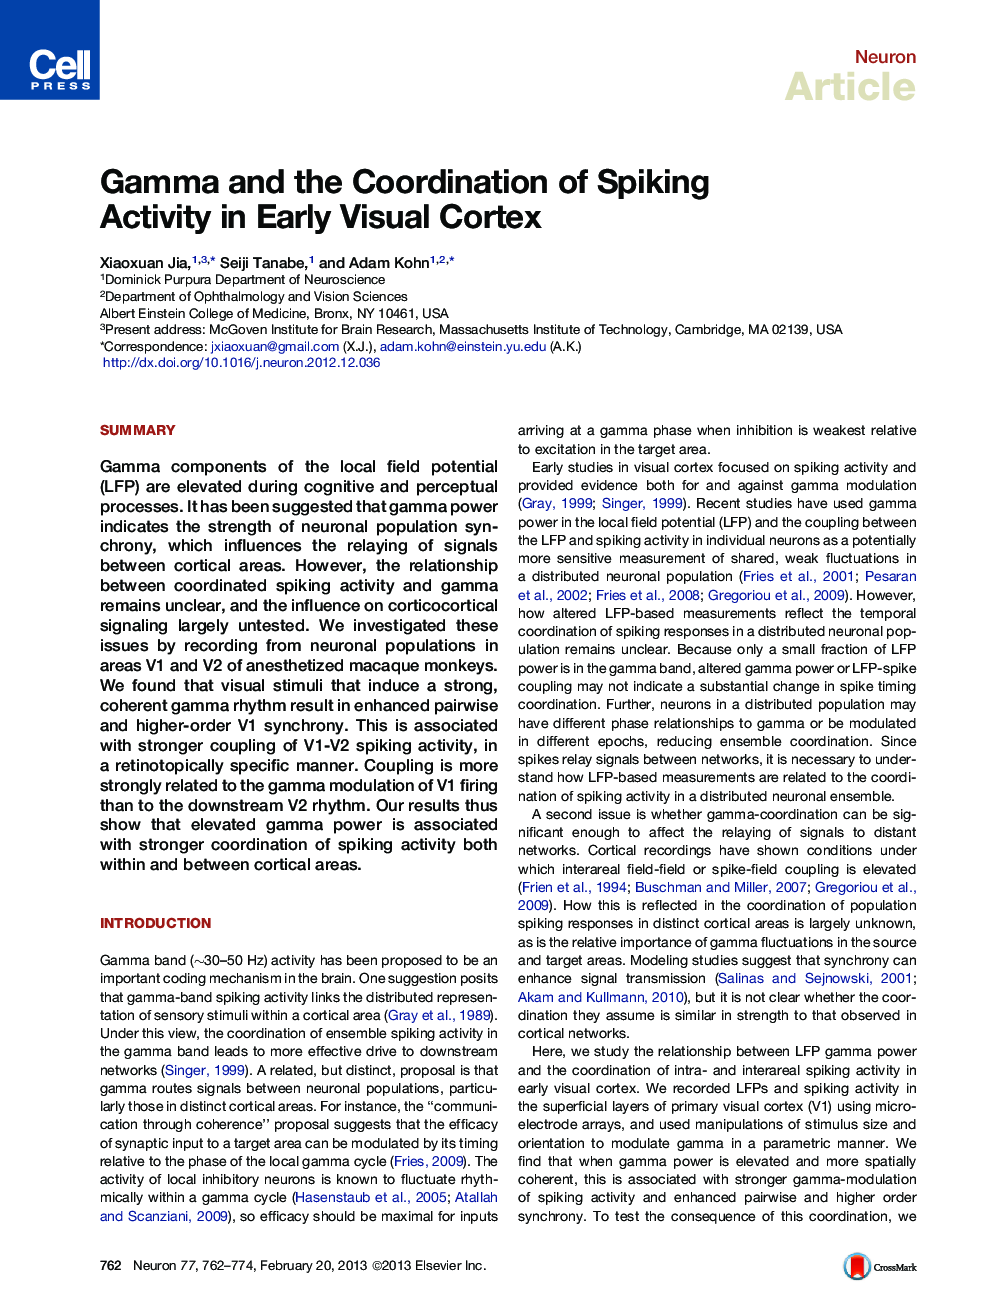 Gamma and the Coordination of Spiking Activity in Early Visual Cortex